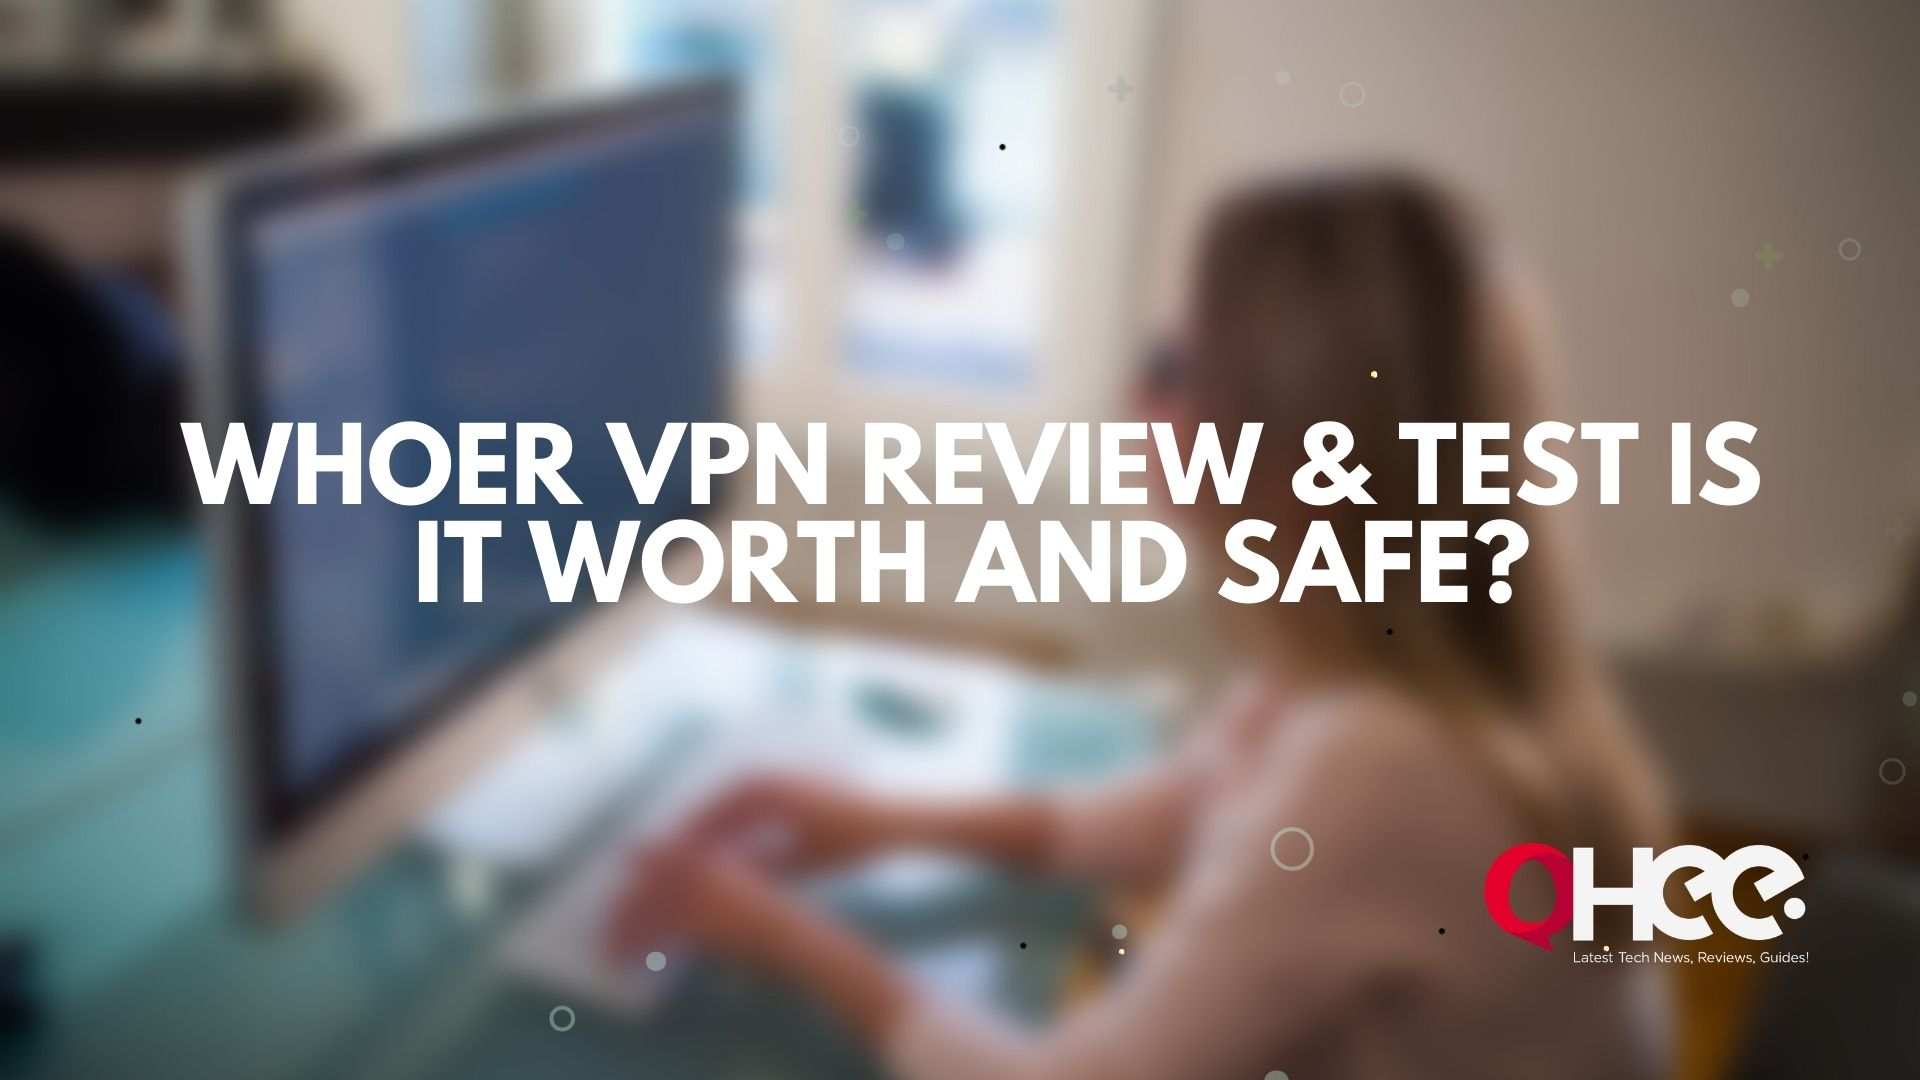 Whoer VPN Review & Test – Is It Worth and Safe?